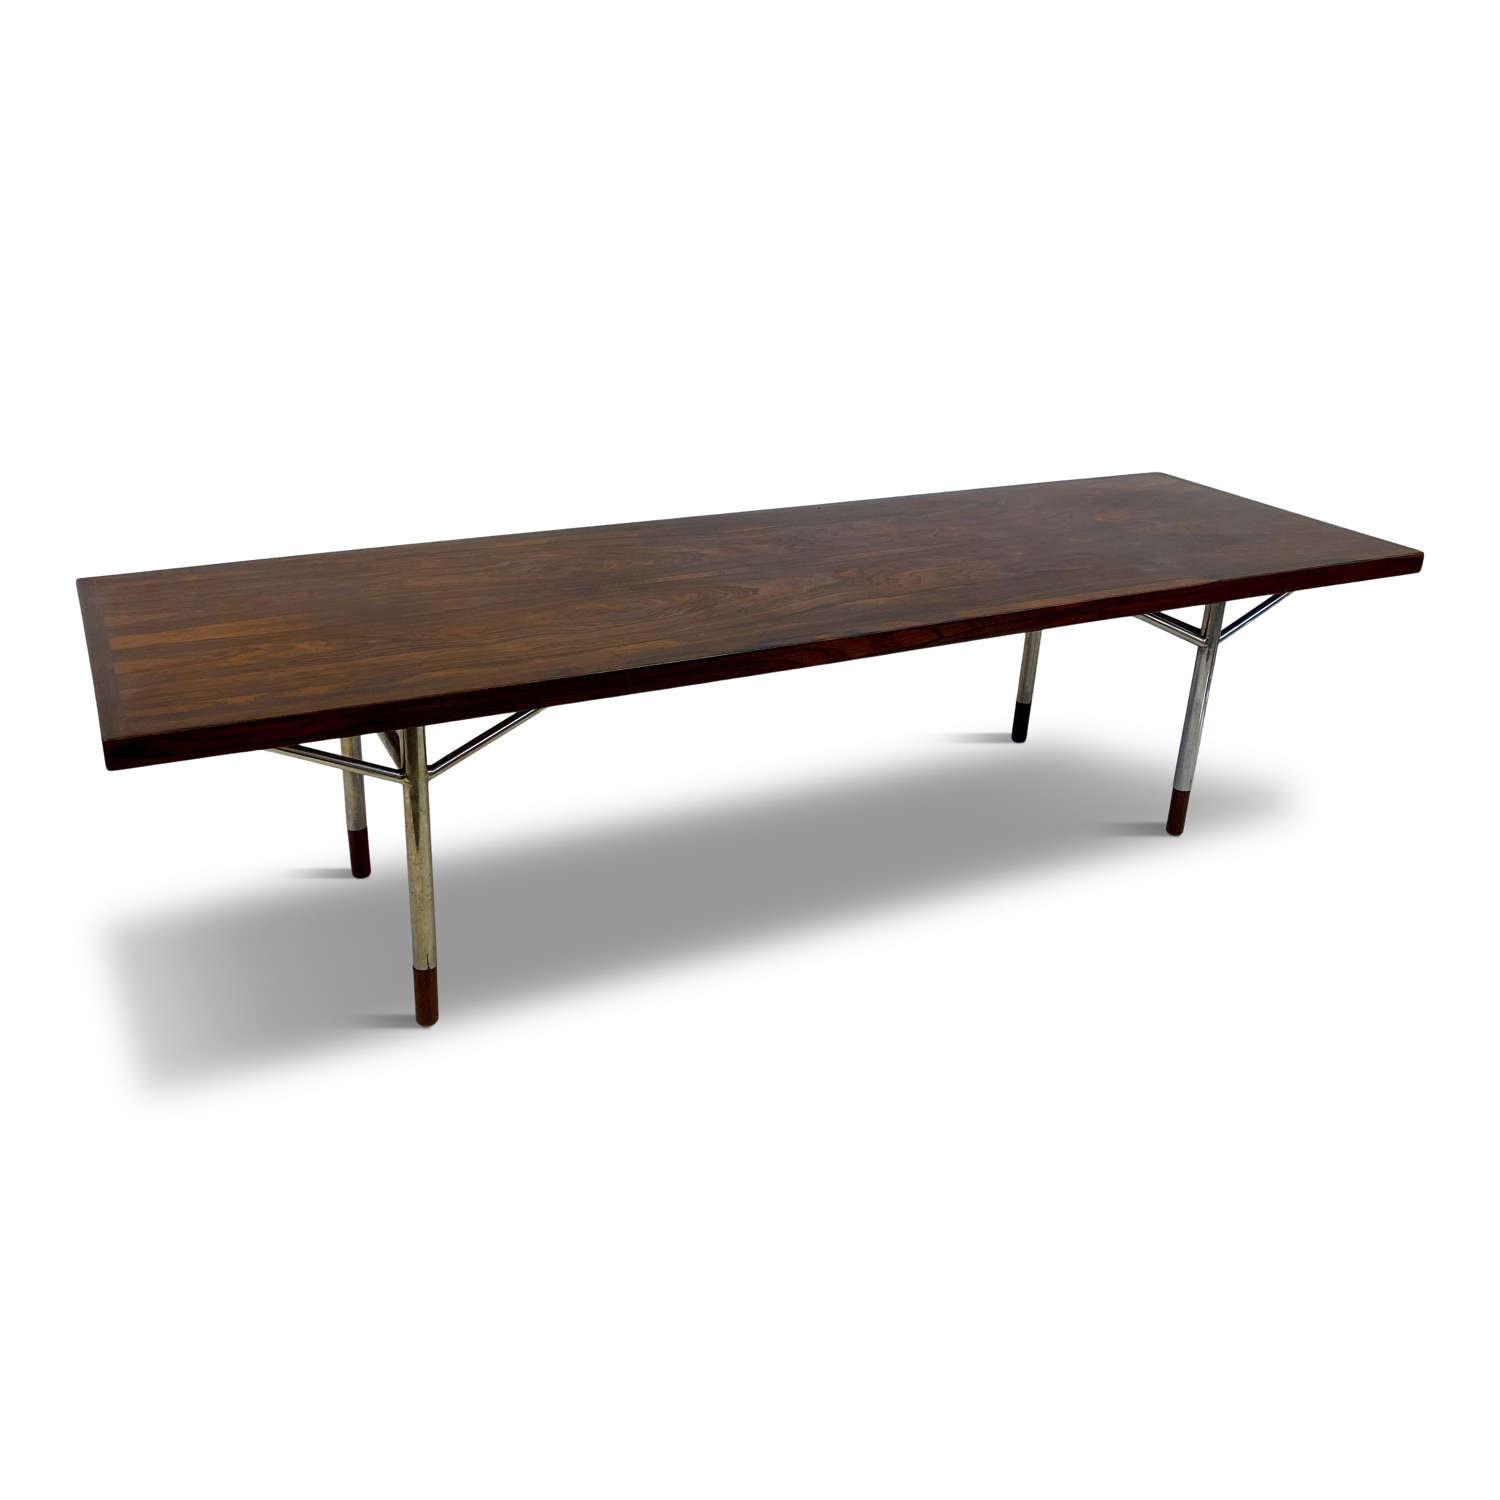 Unique Danish Rosewood Coffee Table Attributed to Arne Vodder